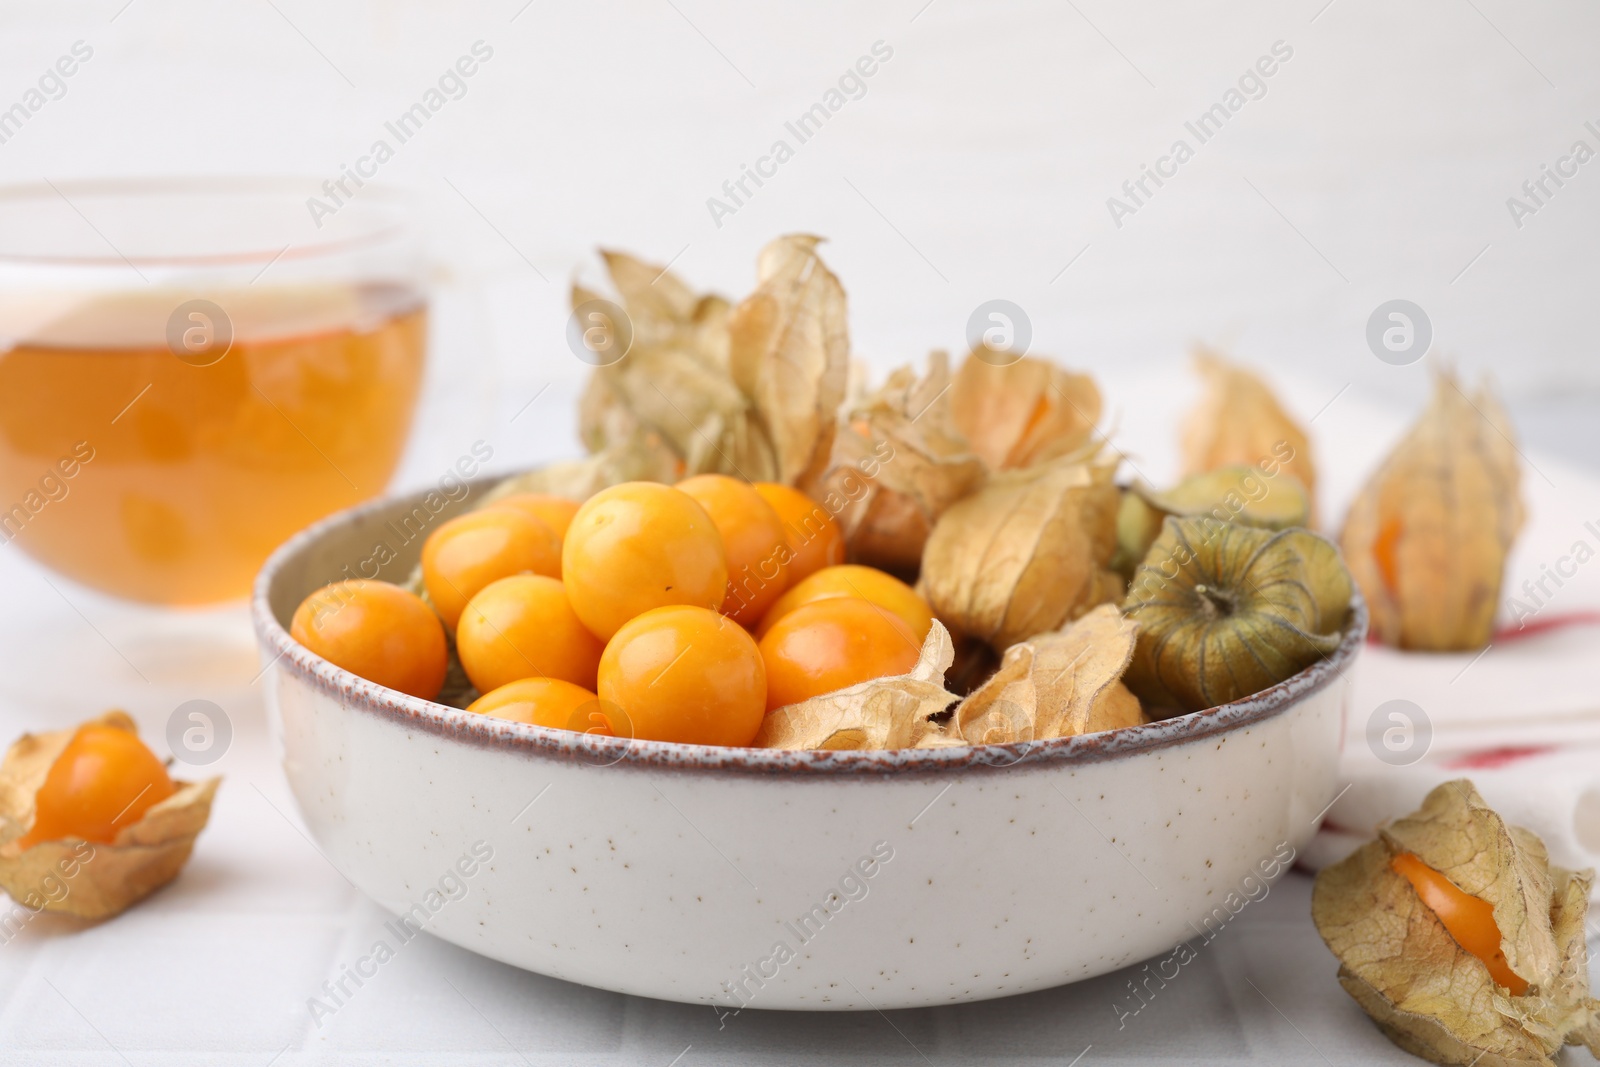 Photo of Ripe physalis fruits with calyxes in bowl on white tiled table, closeup